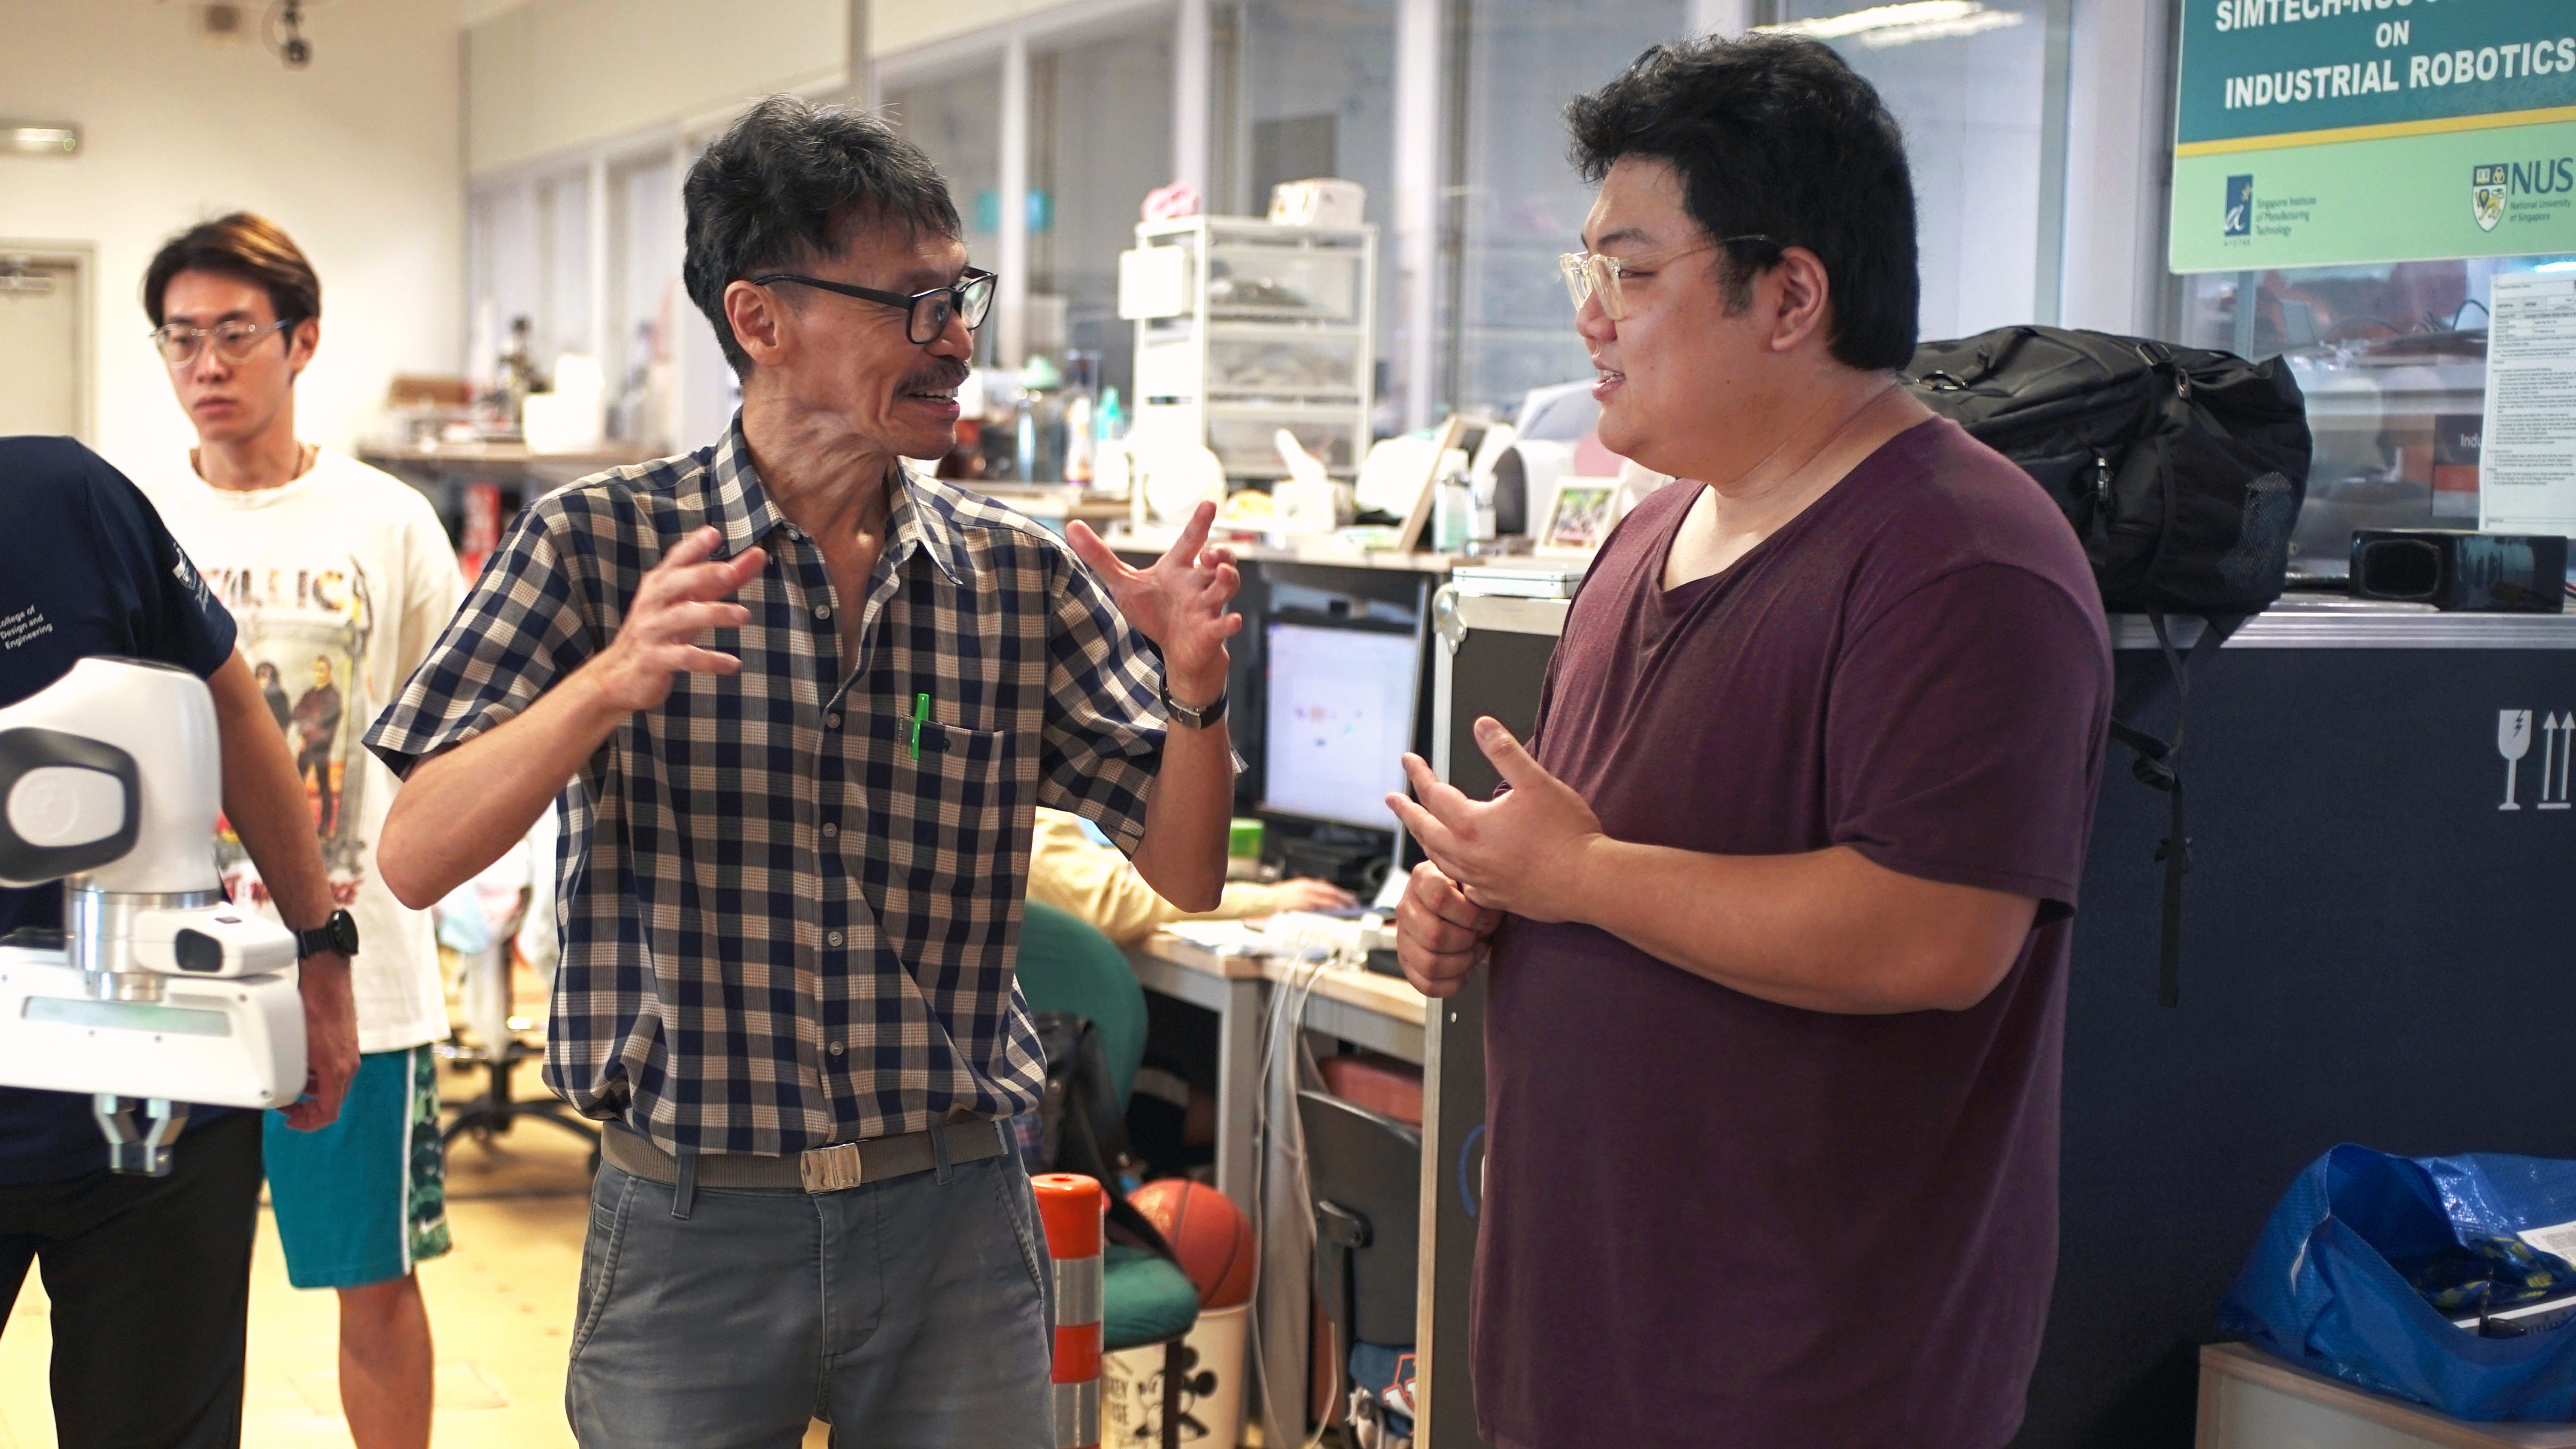 Prof Marcelo Ang with Ziggy at the Advanced Robotics Centre (ARC).